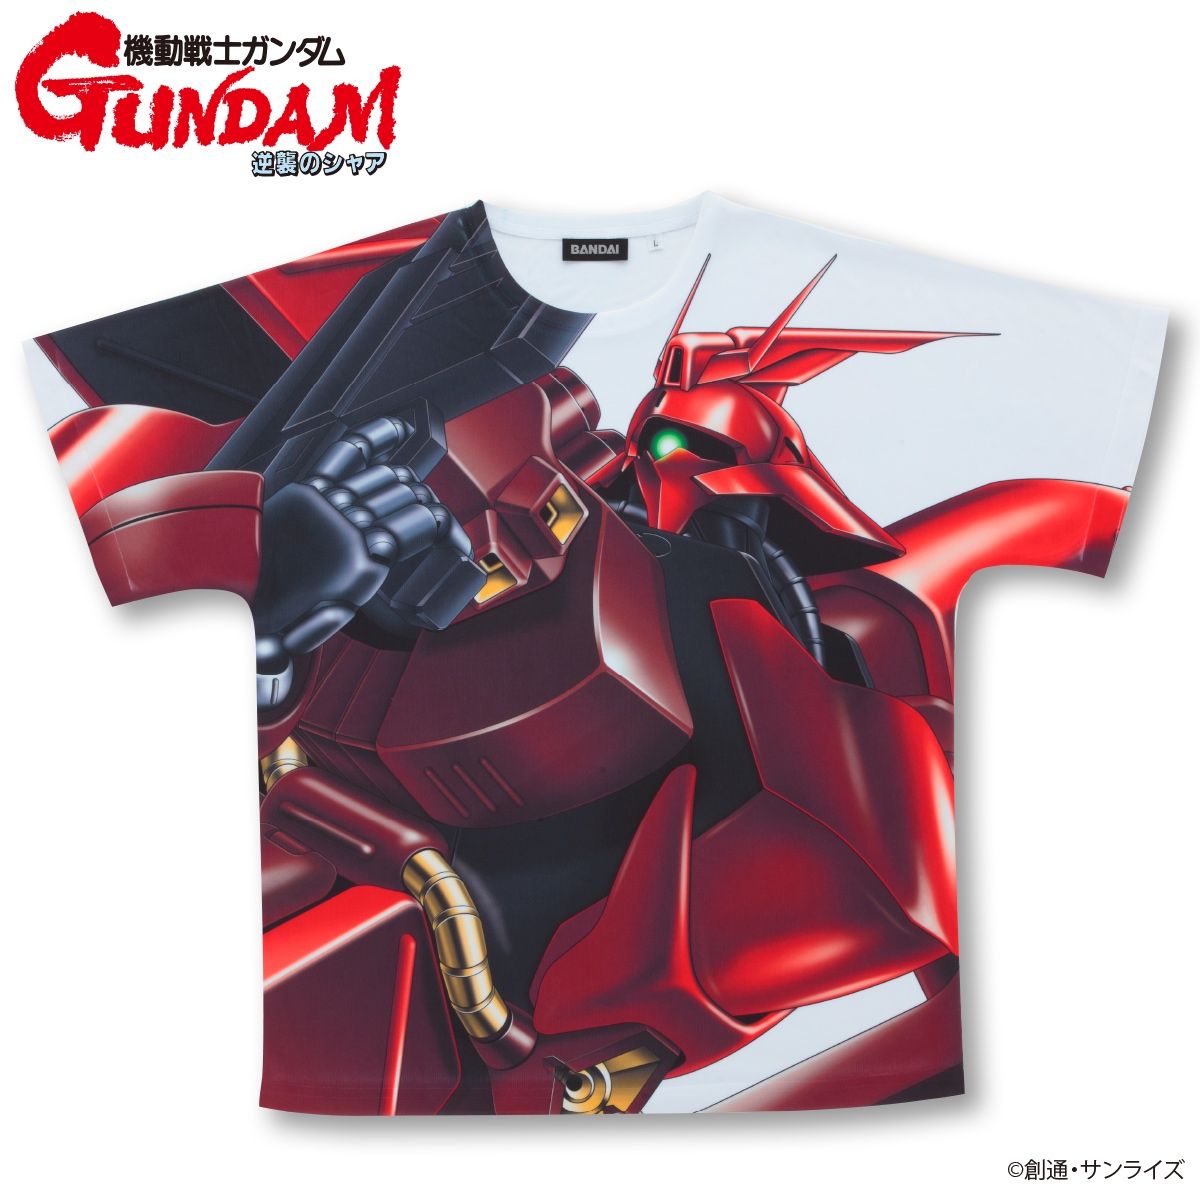 Mobile Suit Gundam: Char's Counterattack All-Over Print T-shirt - MSN-04 ver.